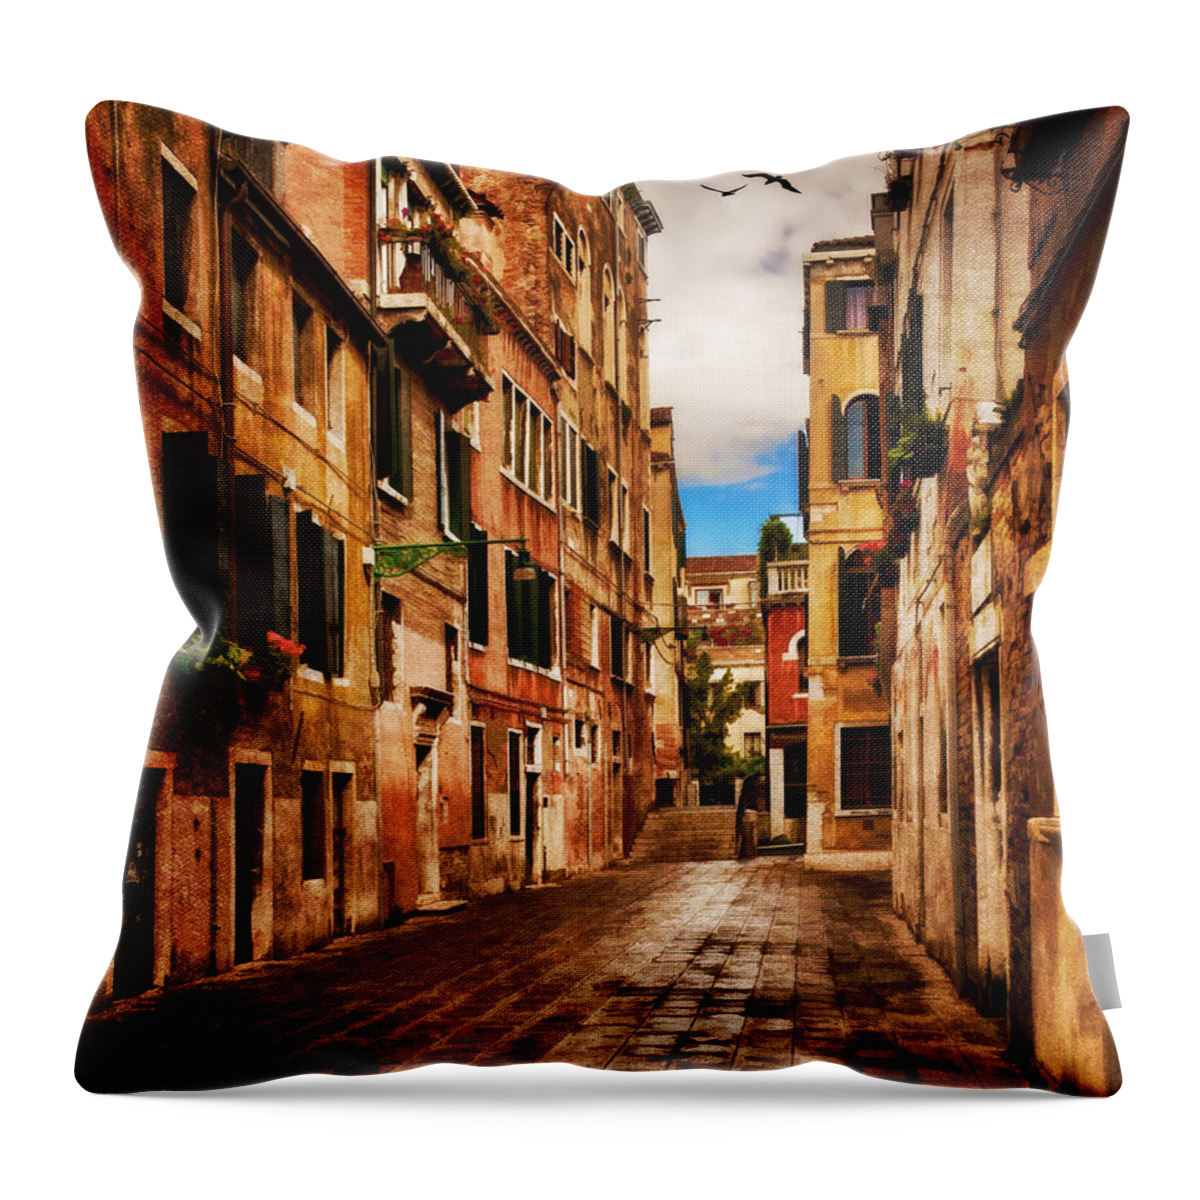 Street Throw Pillow featuring the photograph Side Street in Venice by Mick Burkey